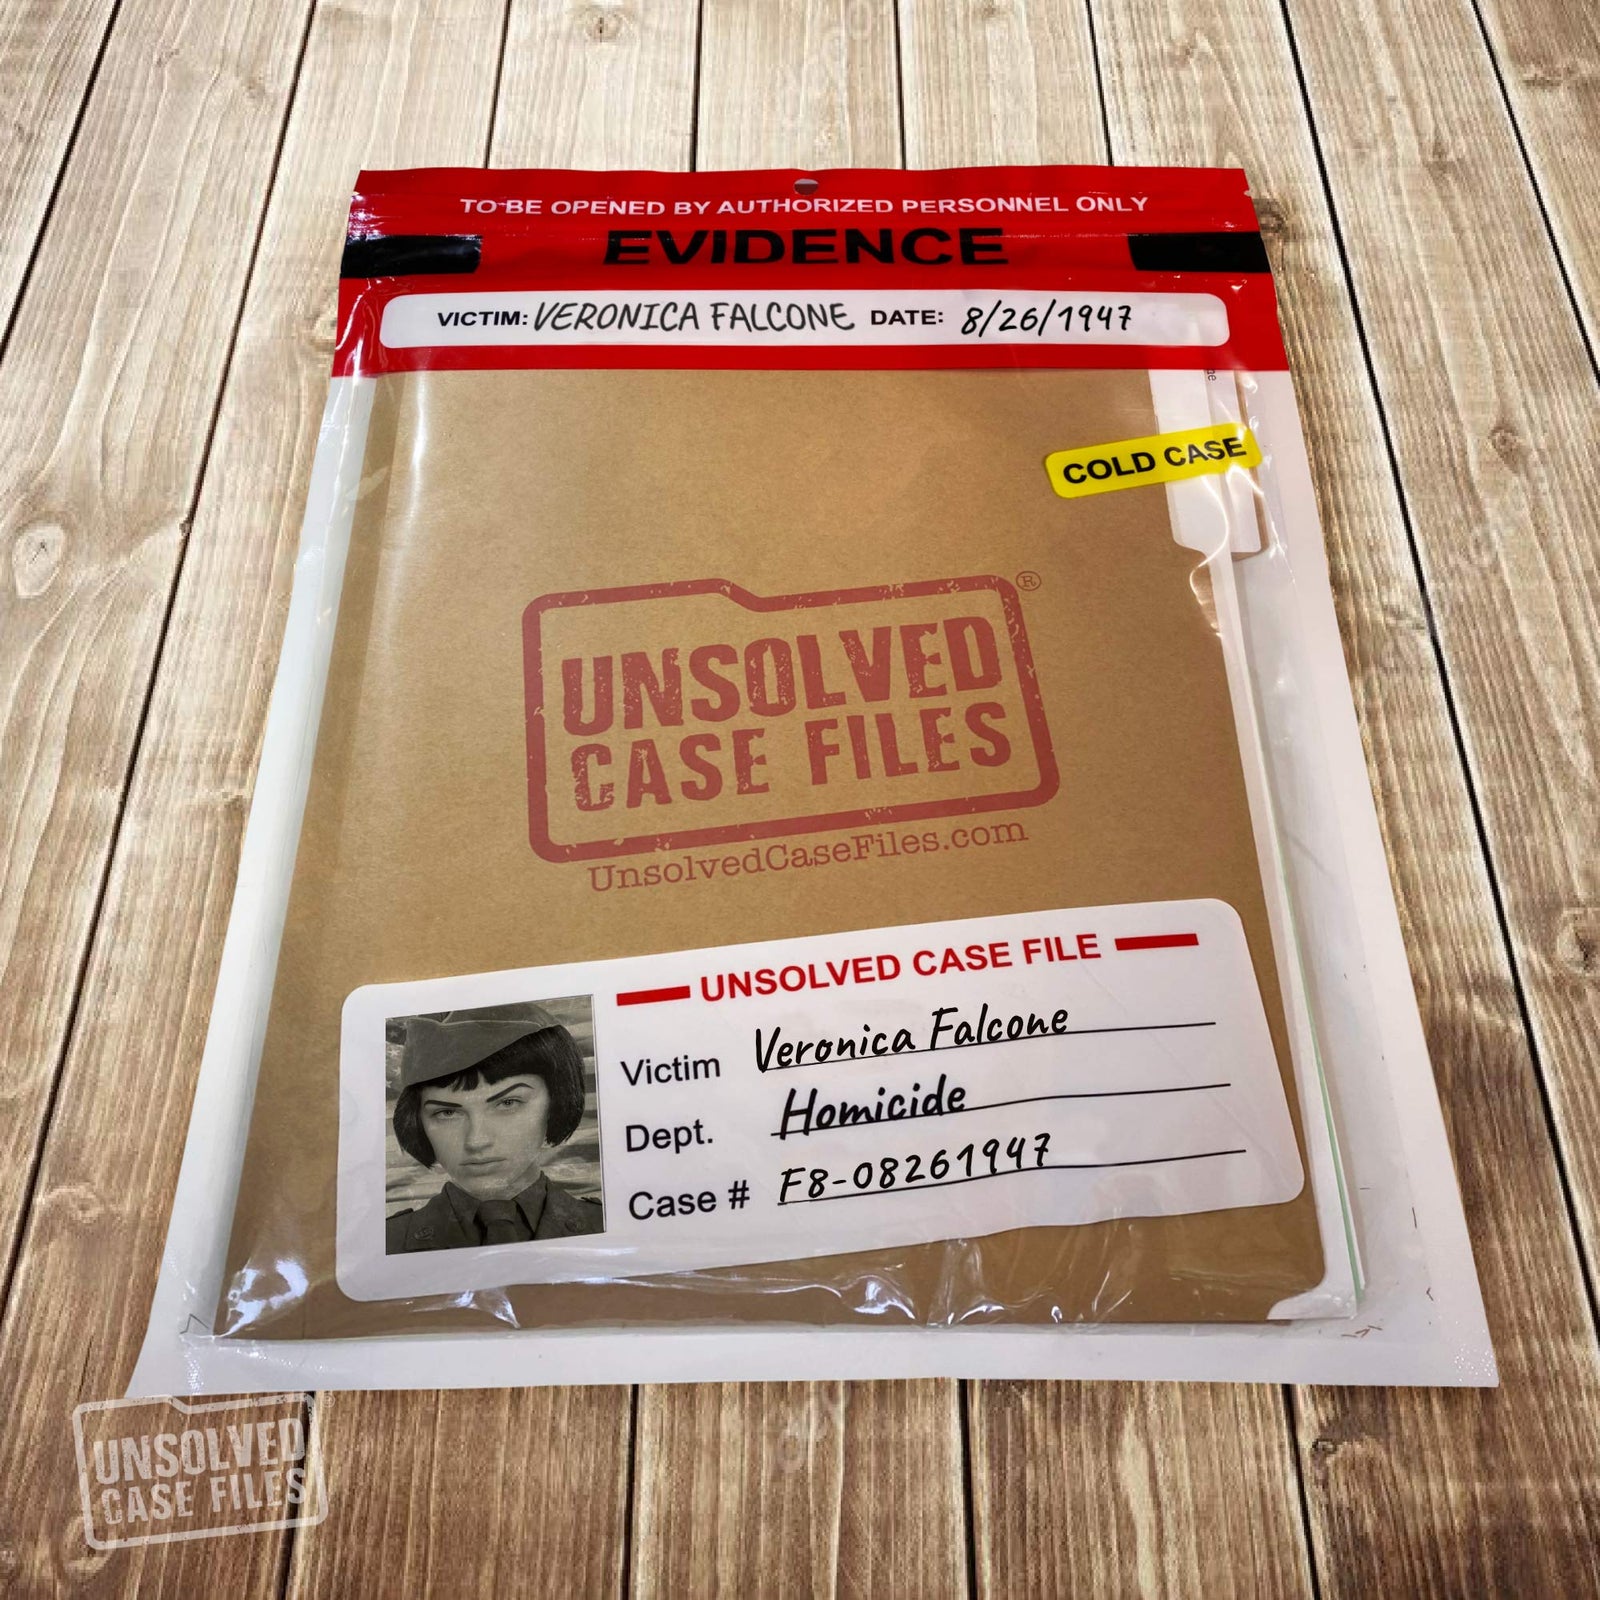 UNSOLVED CASE FILES | Falcone, Veronica - Cold Case Murder Mystery Game | Can You Solve The Crime?